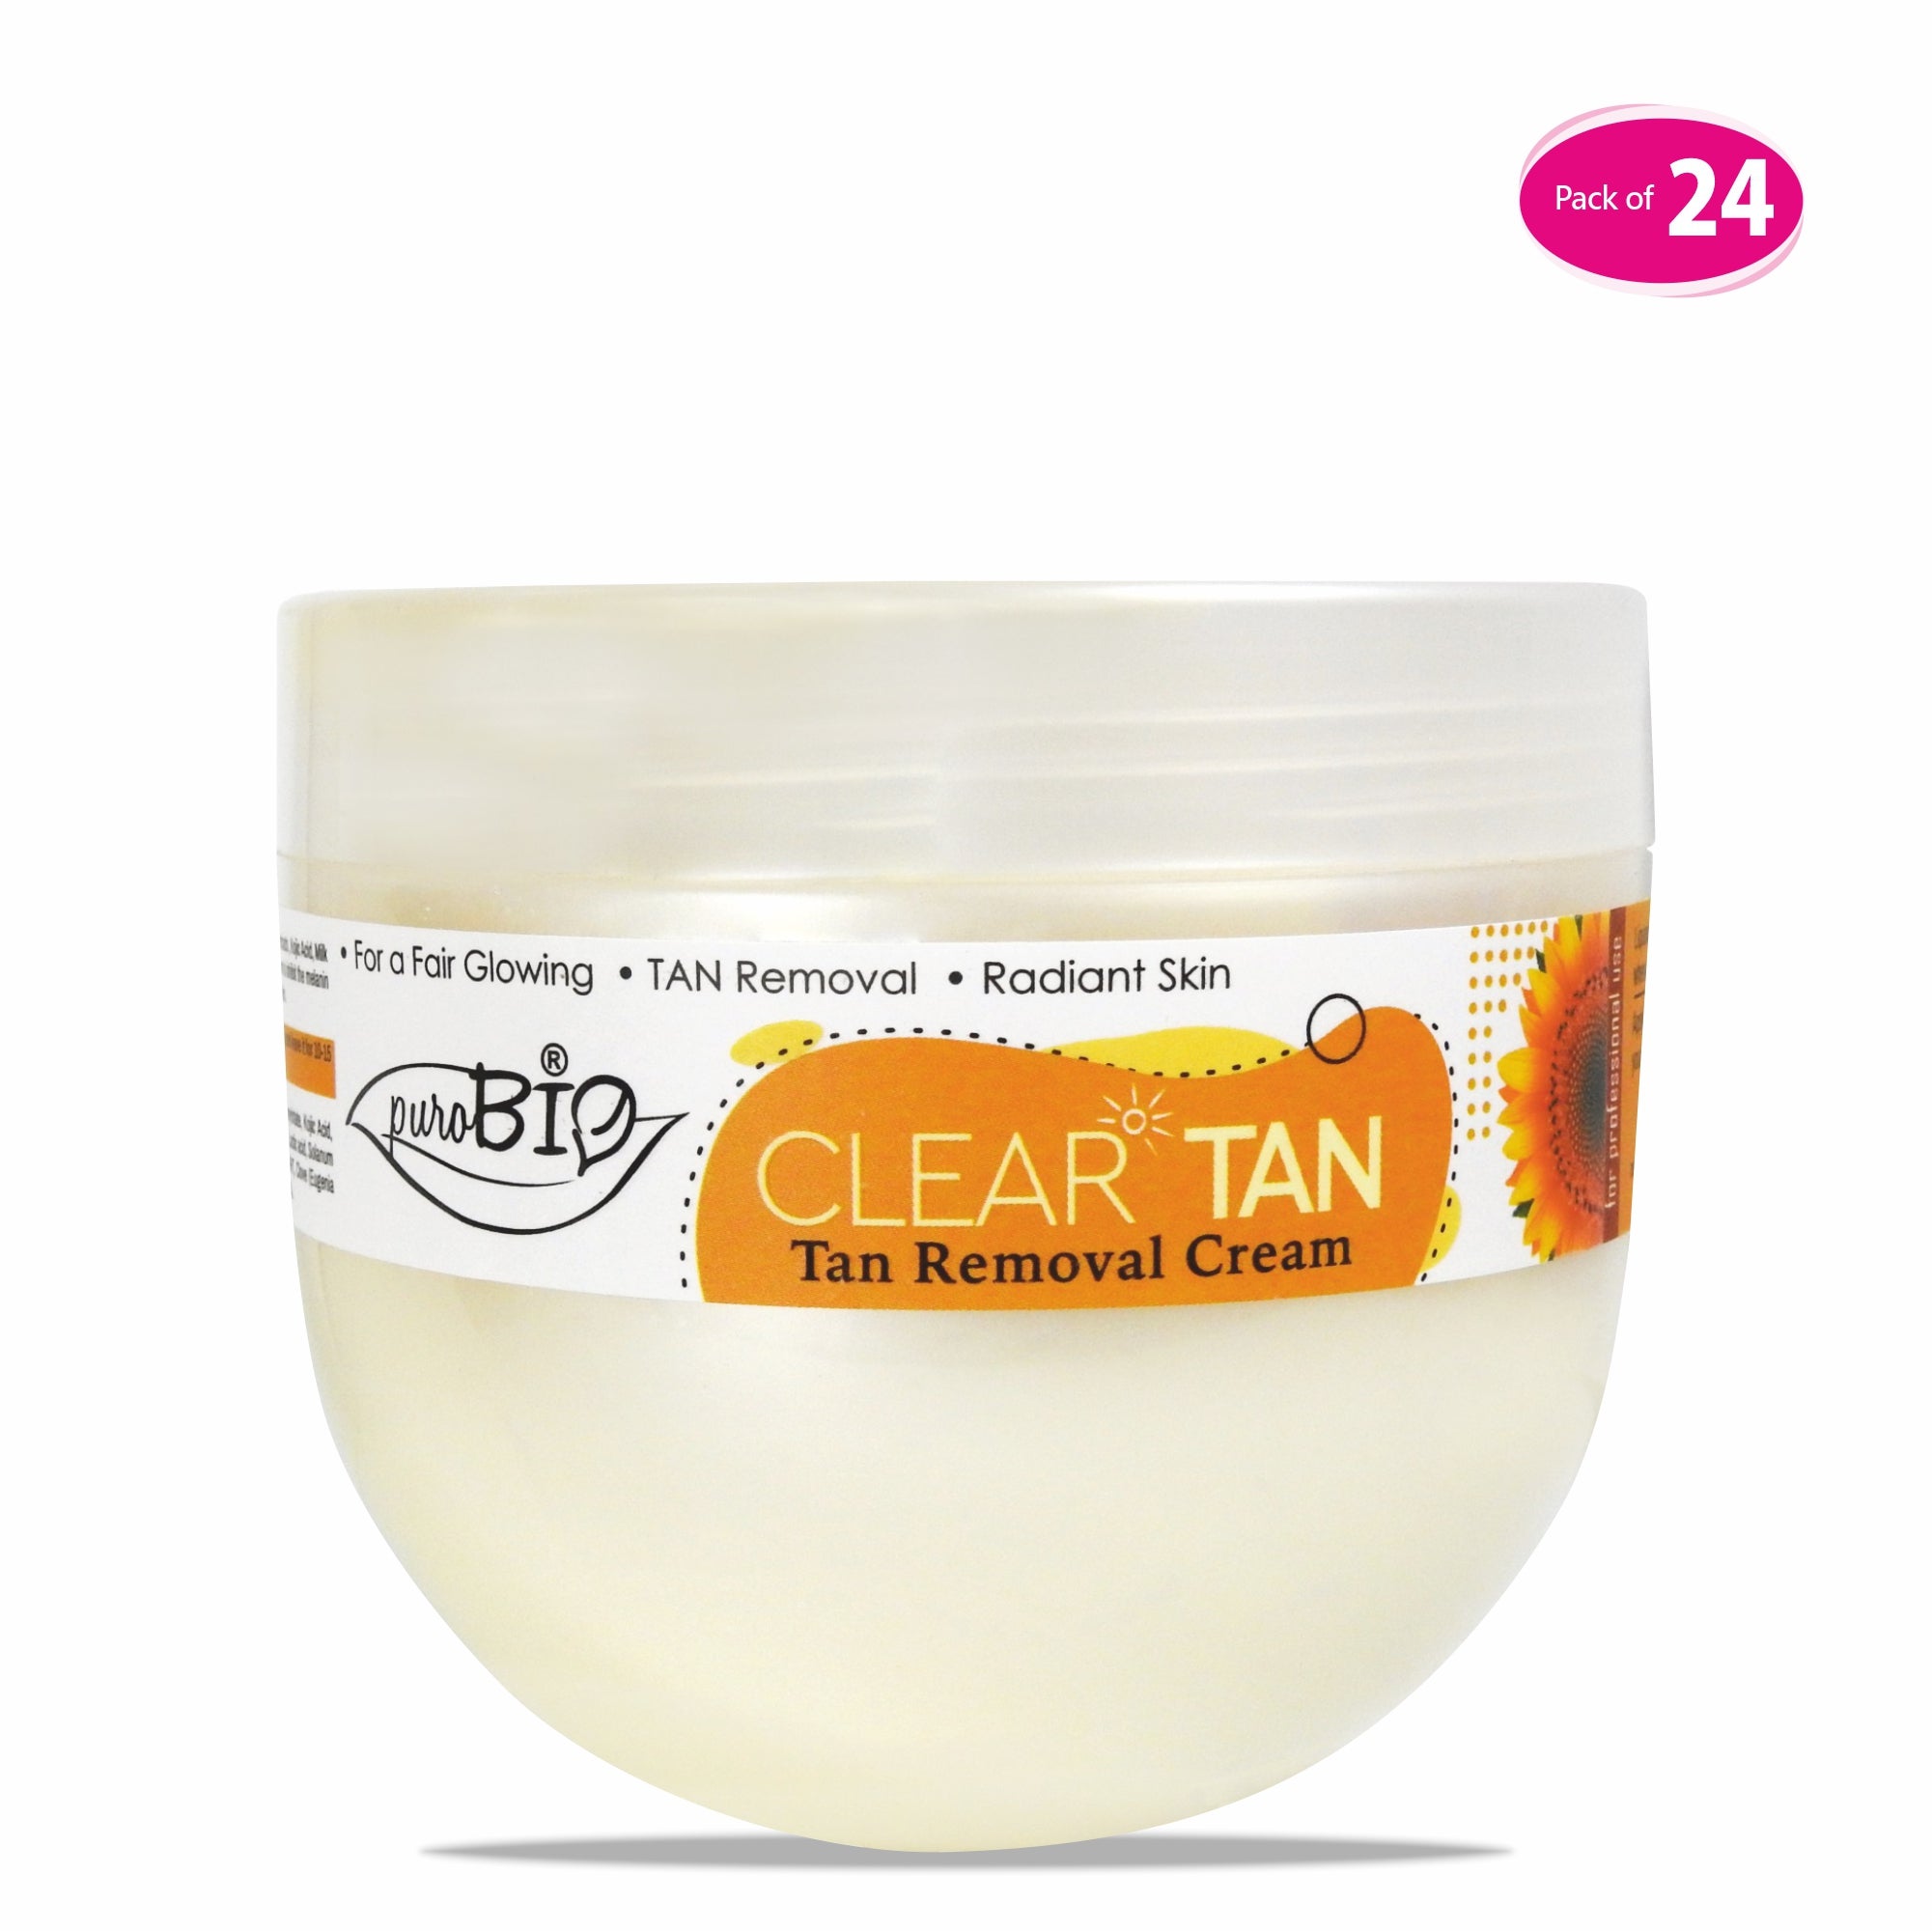 ClearTan Face Pack Best Tan removal Cream in bulk 24 quantity